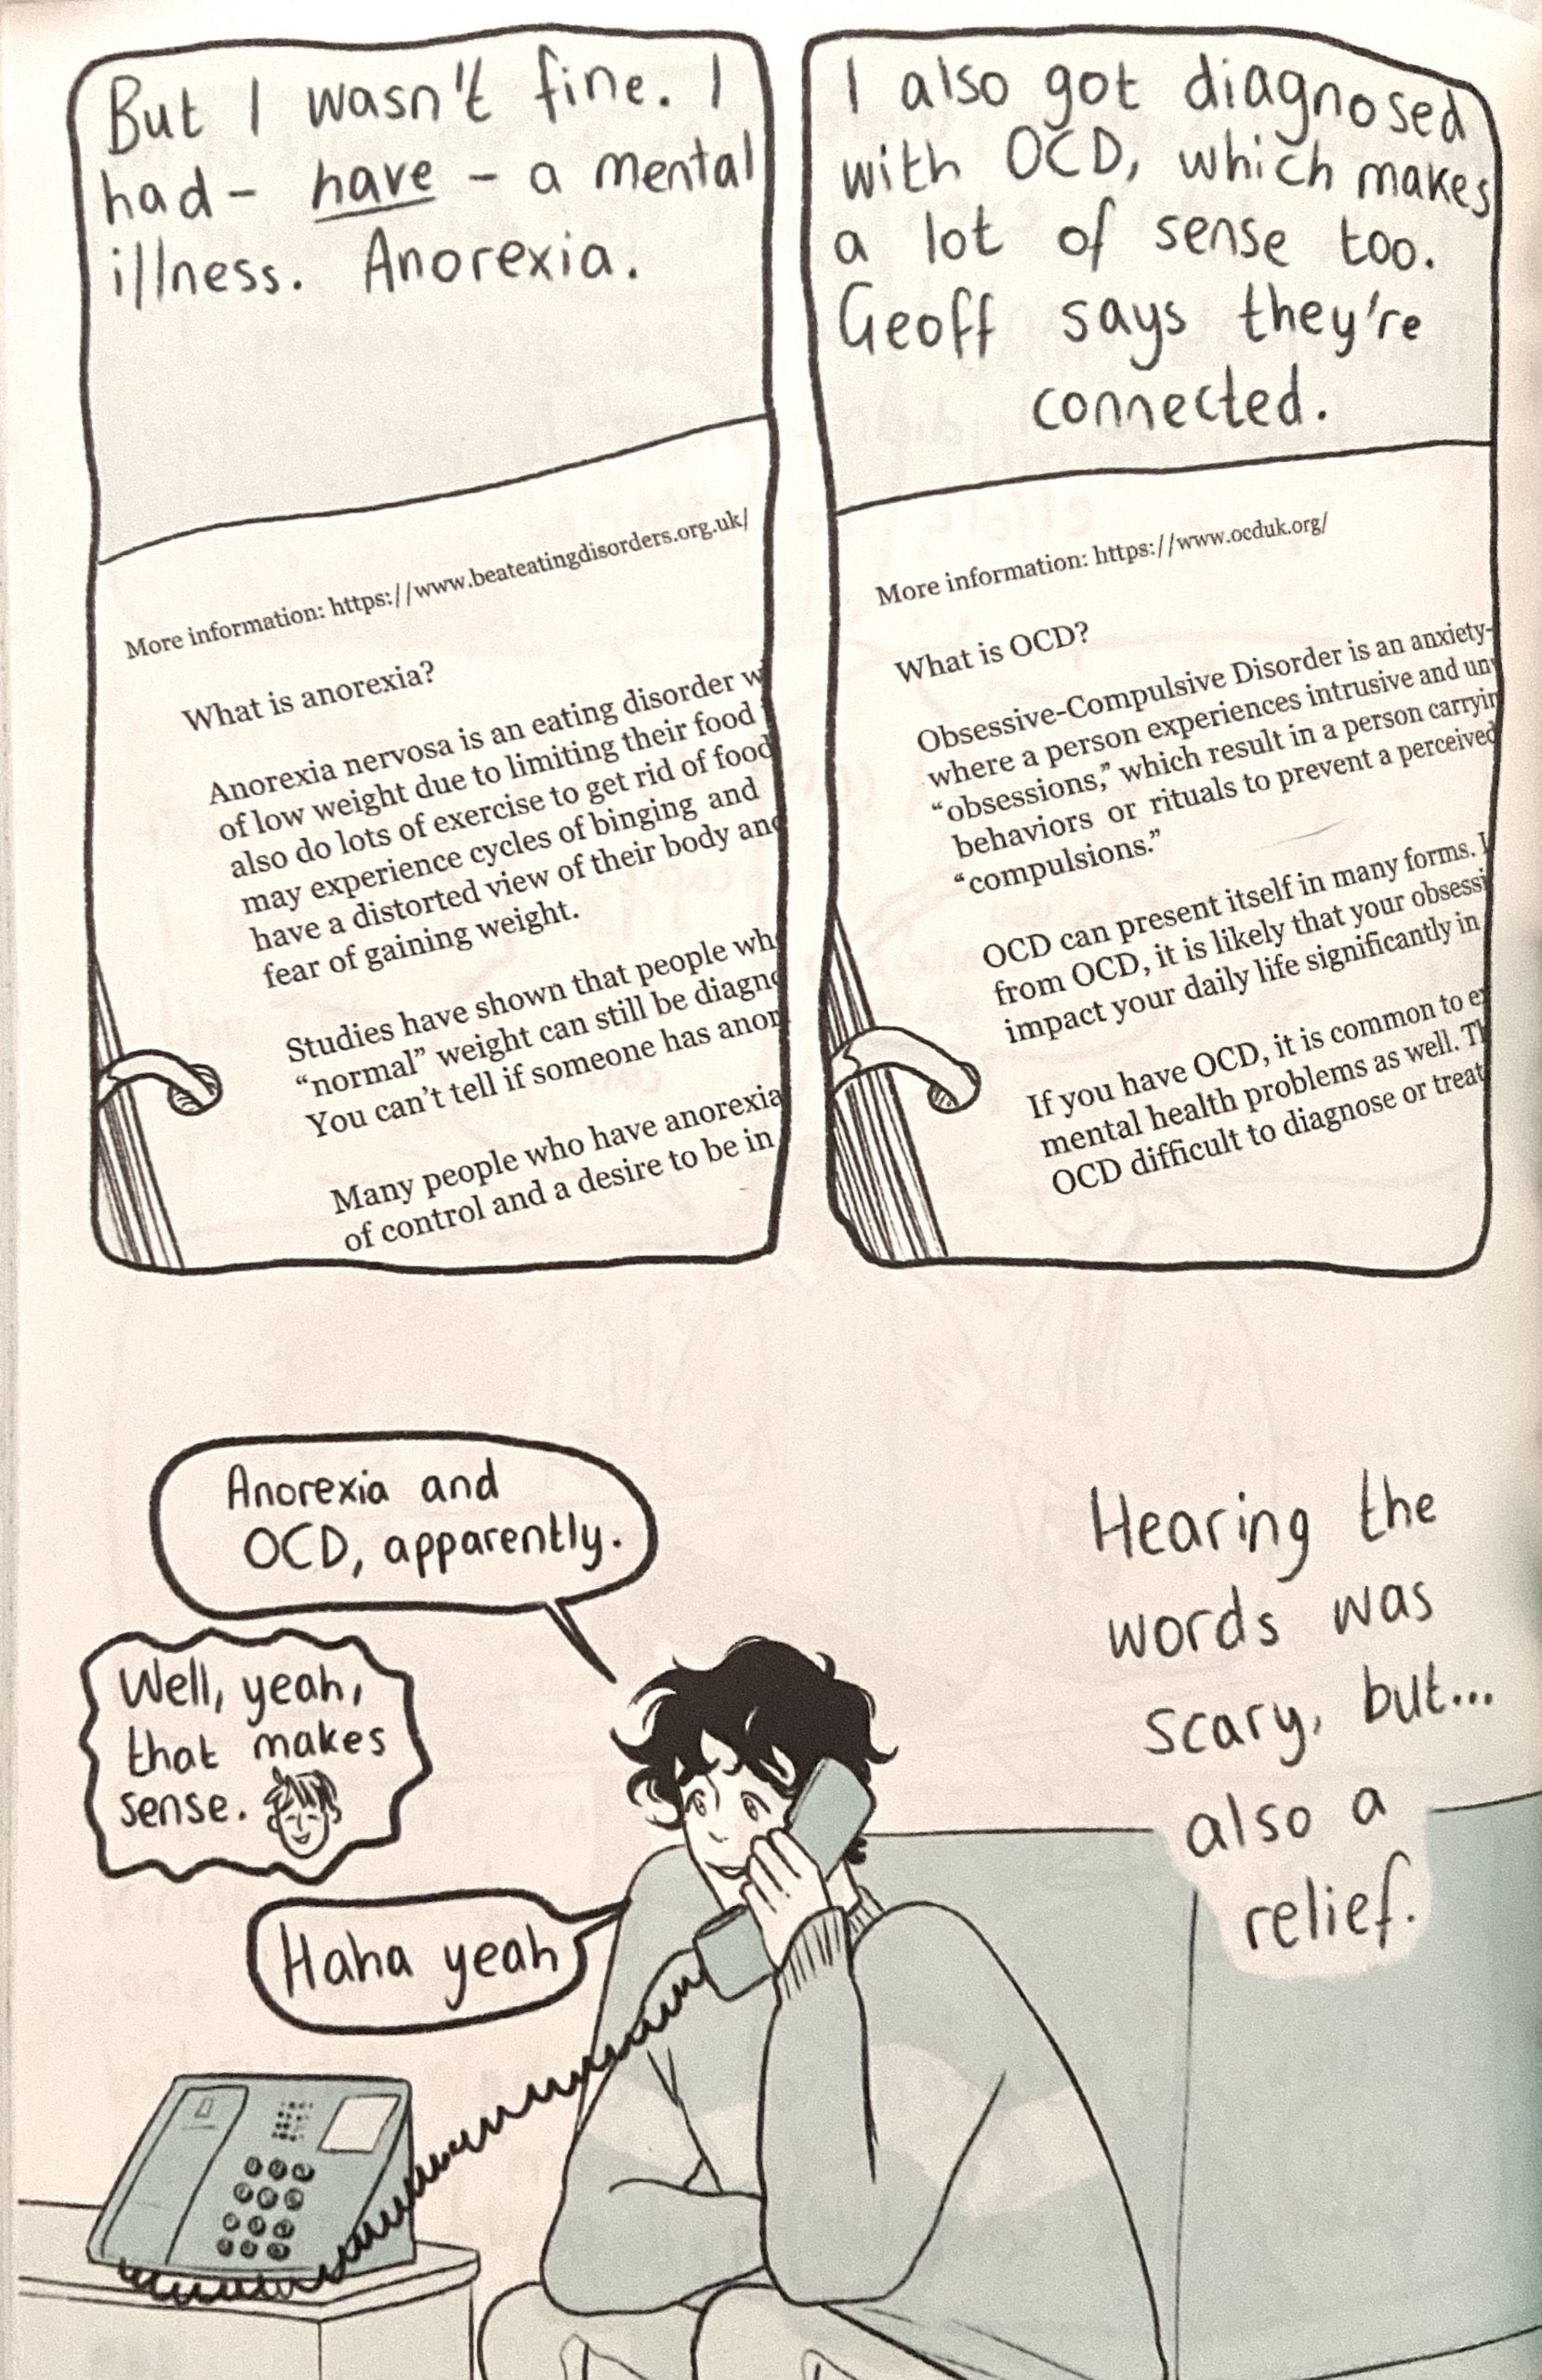 An excerpt from "Heartstopper: Vol 4." Charlie is admitting that he had anorexia and OCD to Nick over the phone. 